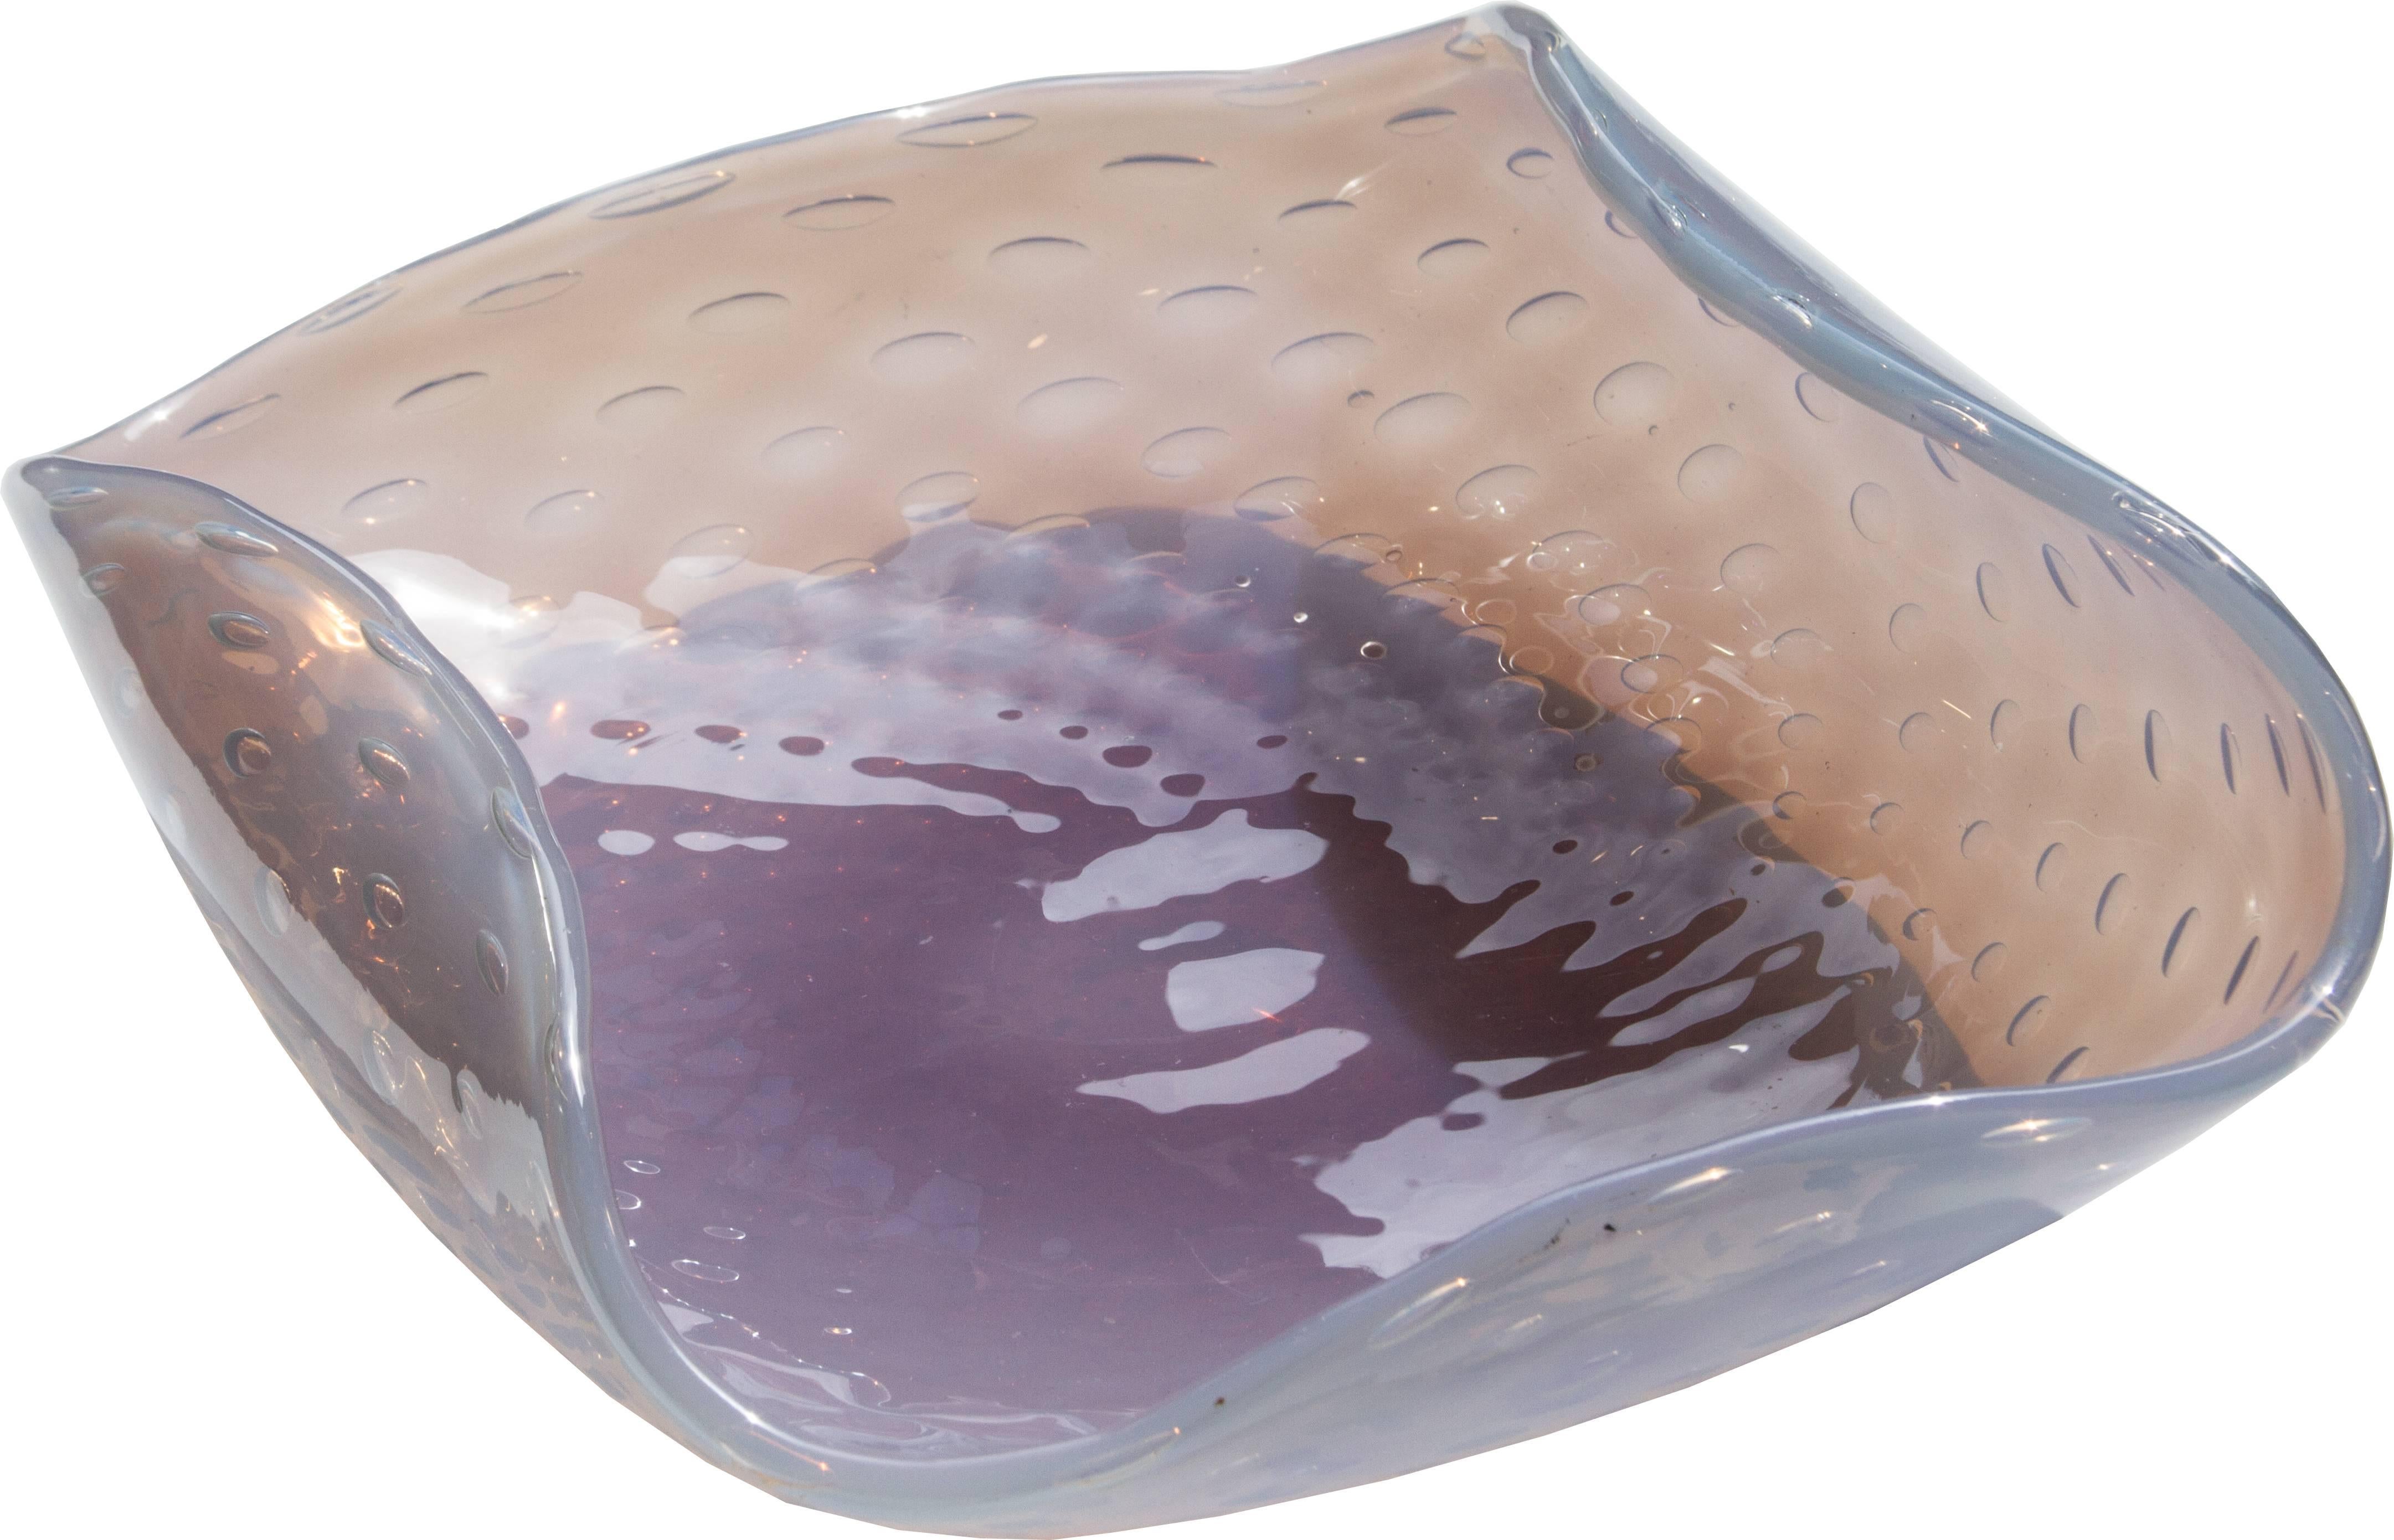 This is a large Murano bowl with a controlled bubble design. The color is unusual, in the light, it looks like a big opal or moonstone casting a pattern.